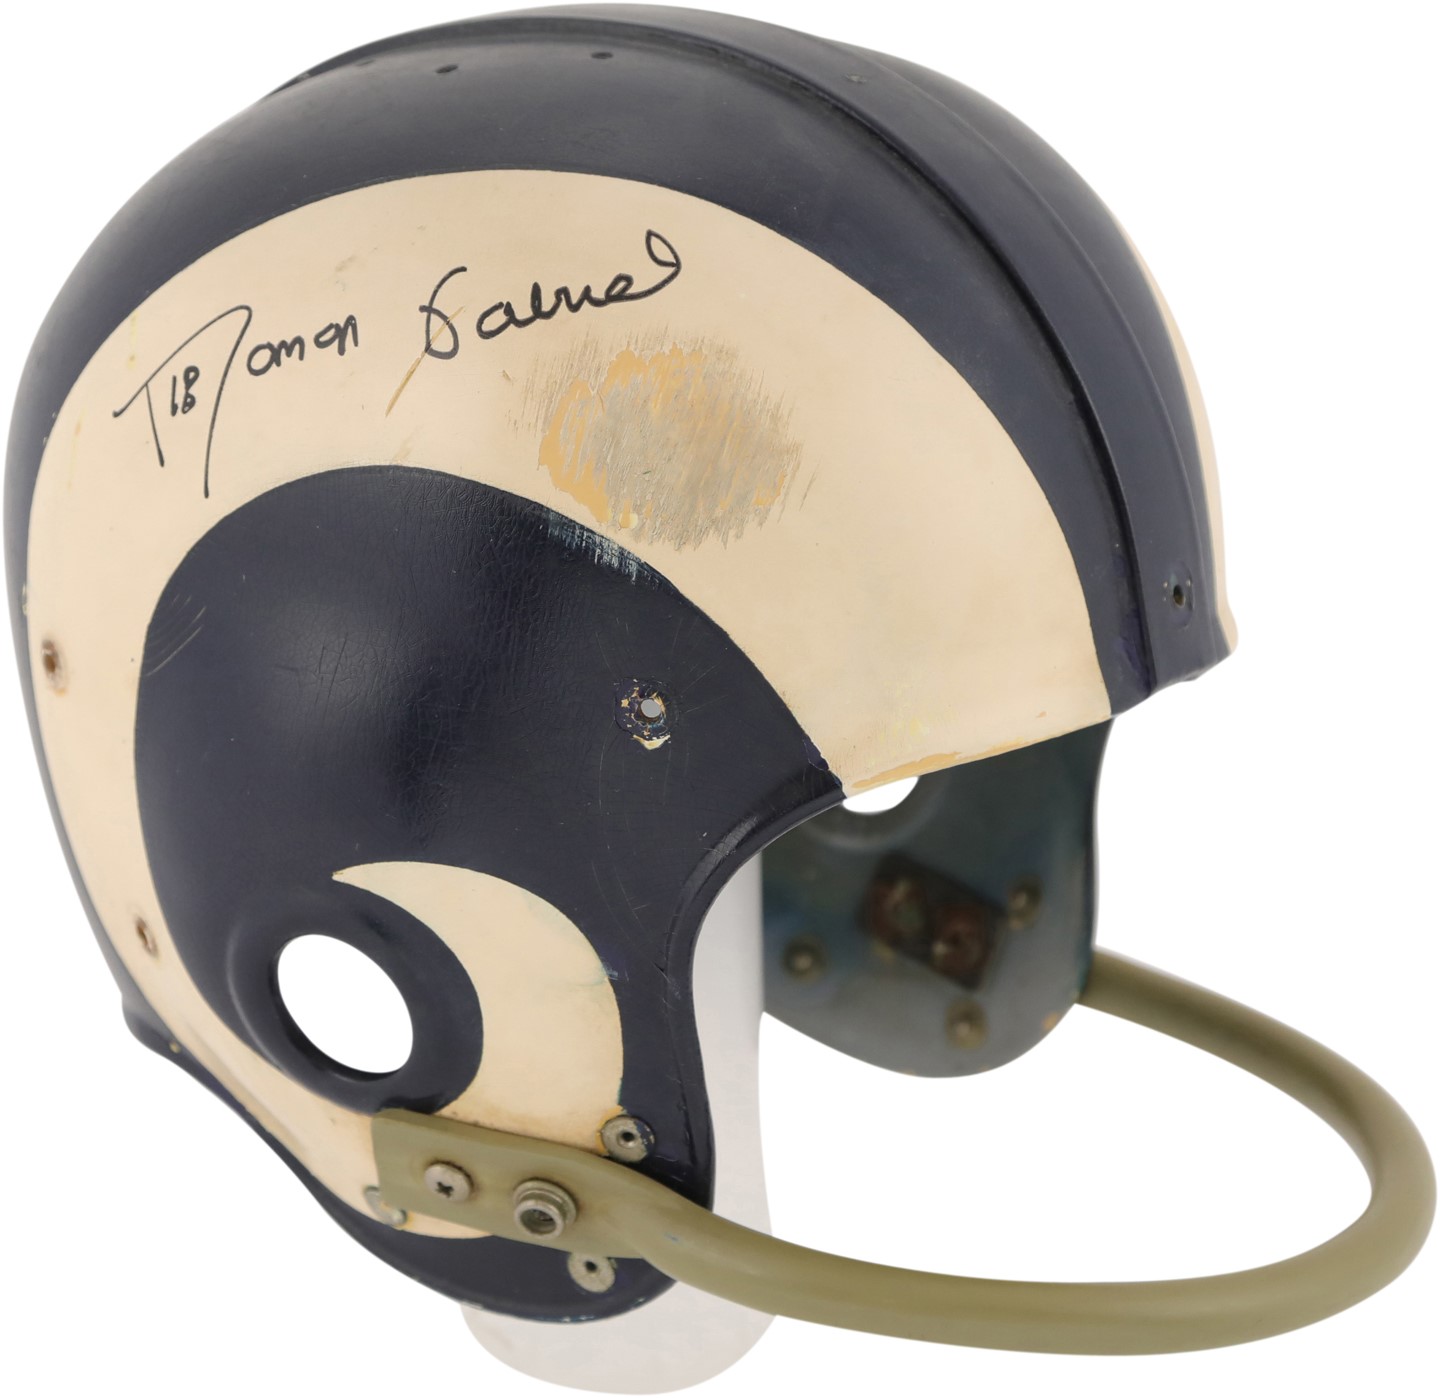 Football - The Concussion Helmet - Roman Gabriel 1970 Los Angeles Signed Game Used Helmet - Used in Government Hearings (Photo-Matched)